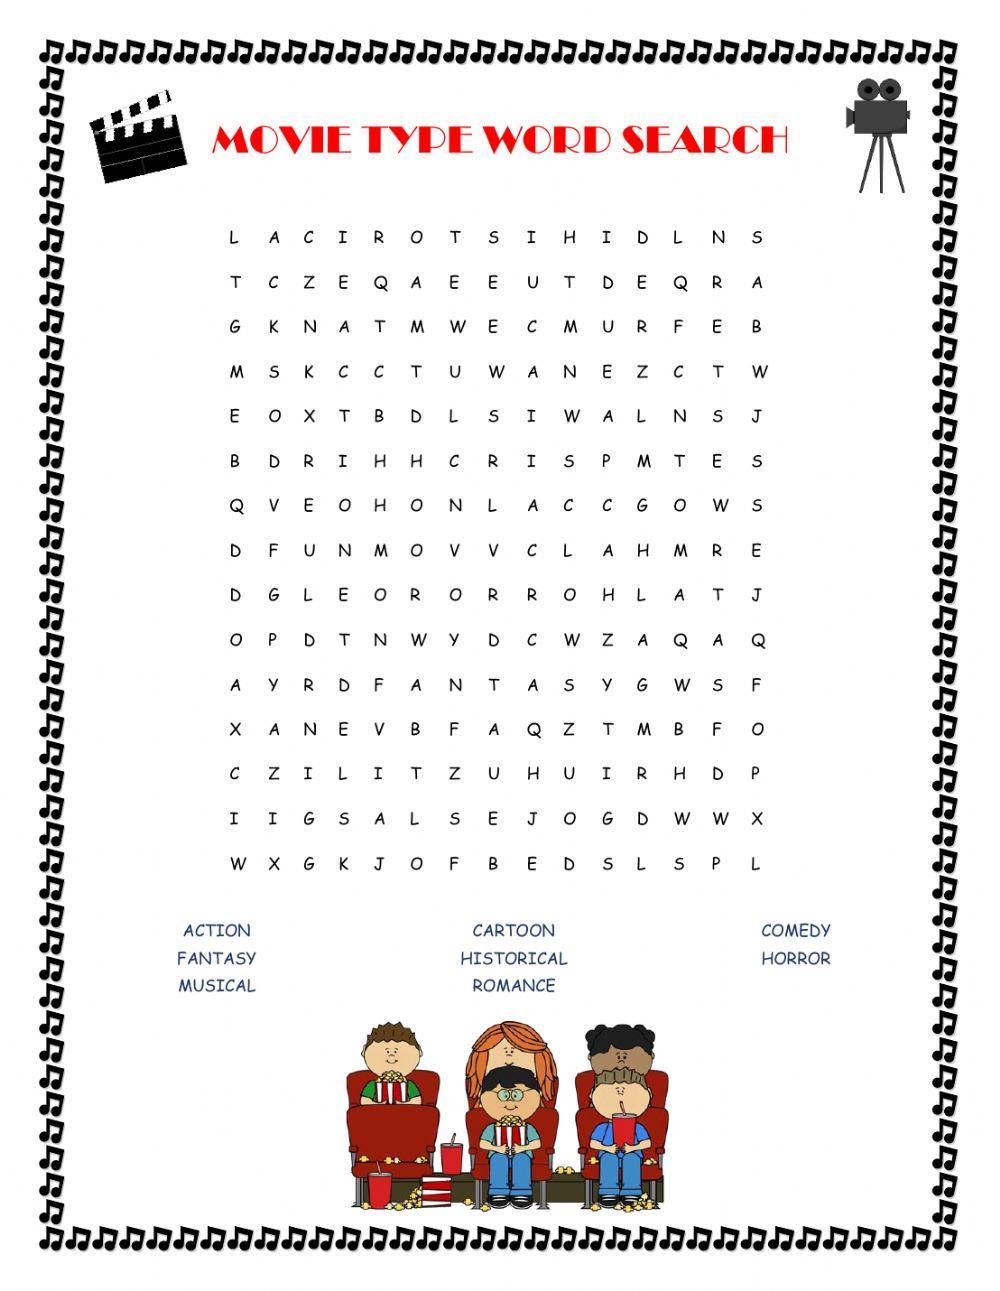 Movie Type Word Search